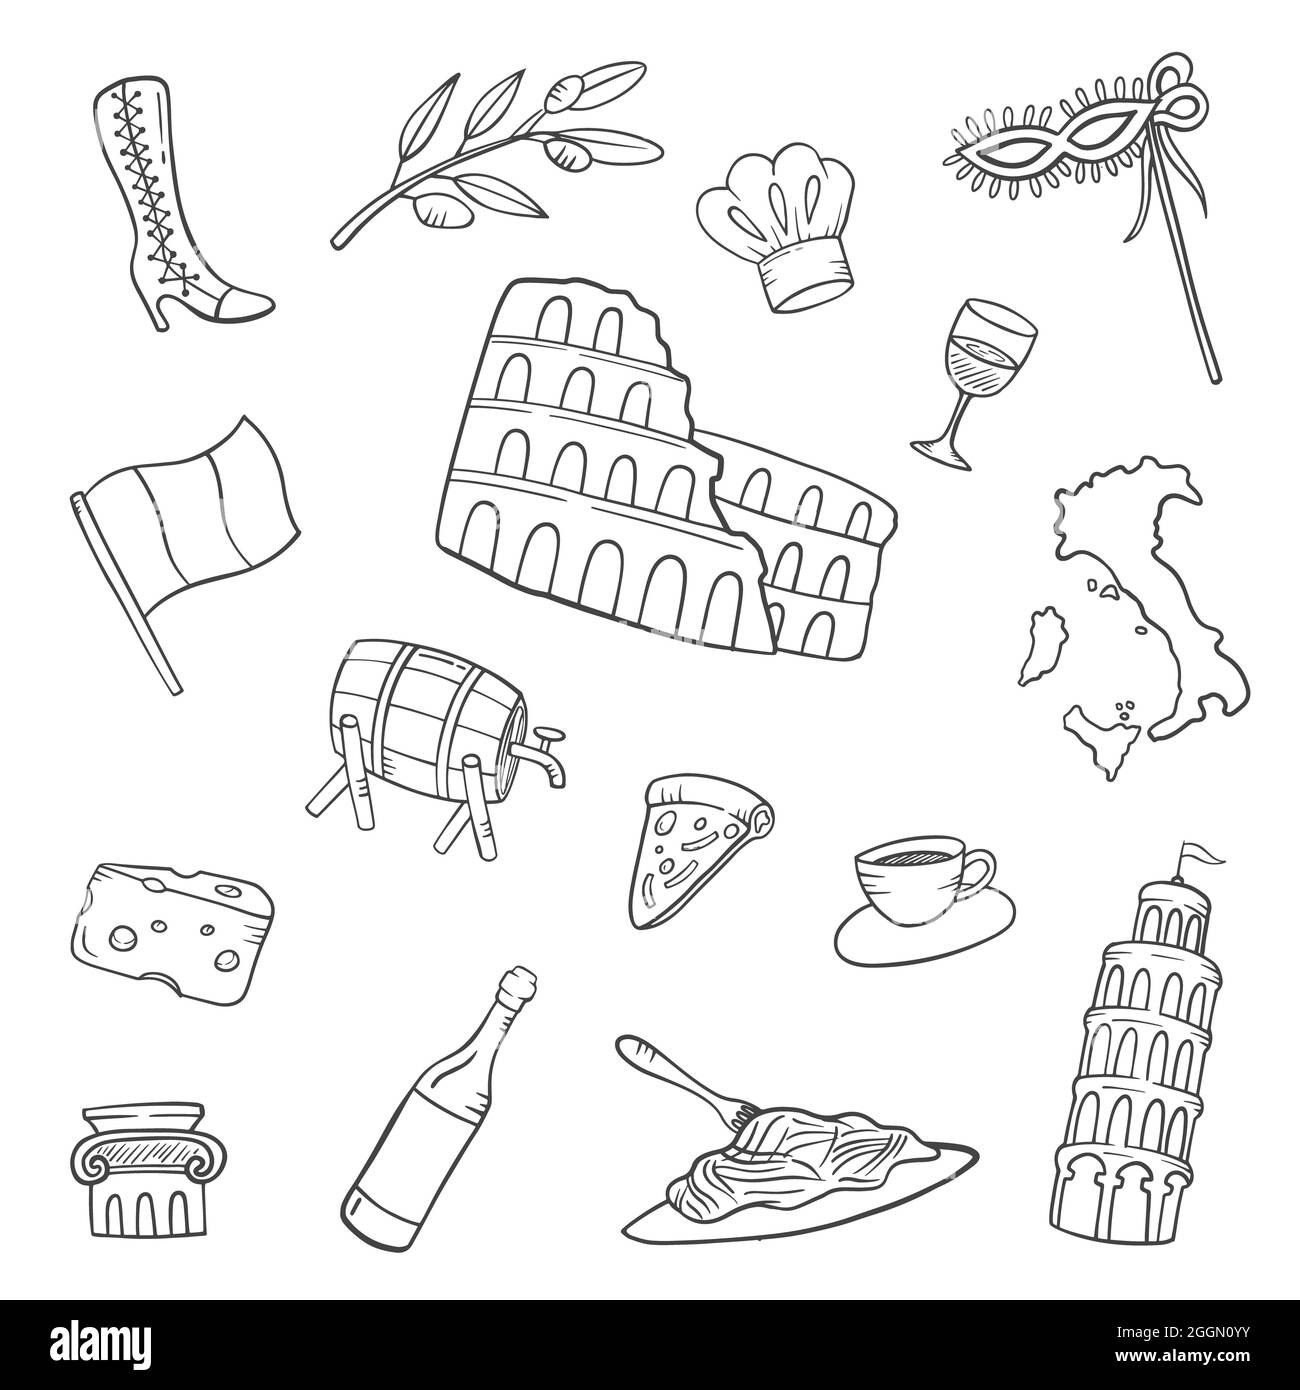 italy country nation doodle hand drawn set collections with outline black and white style vector illustration Stock Photo